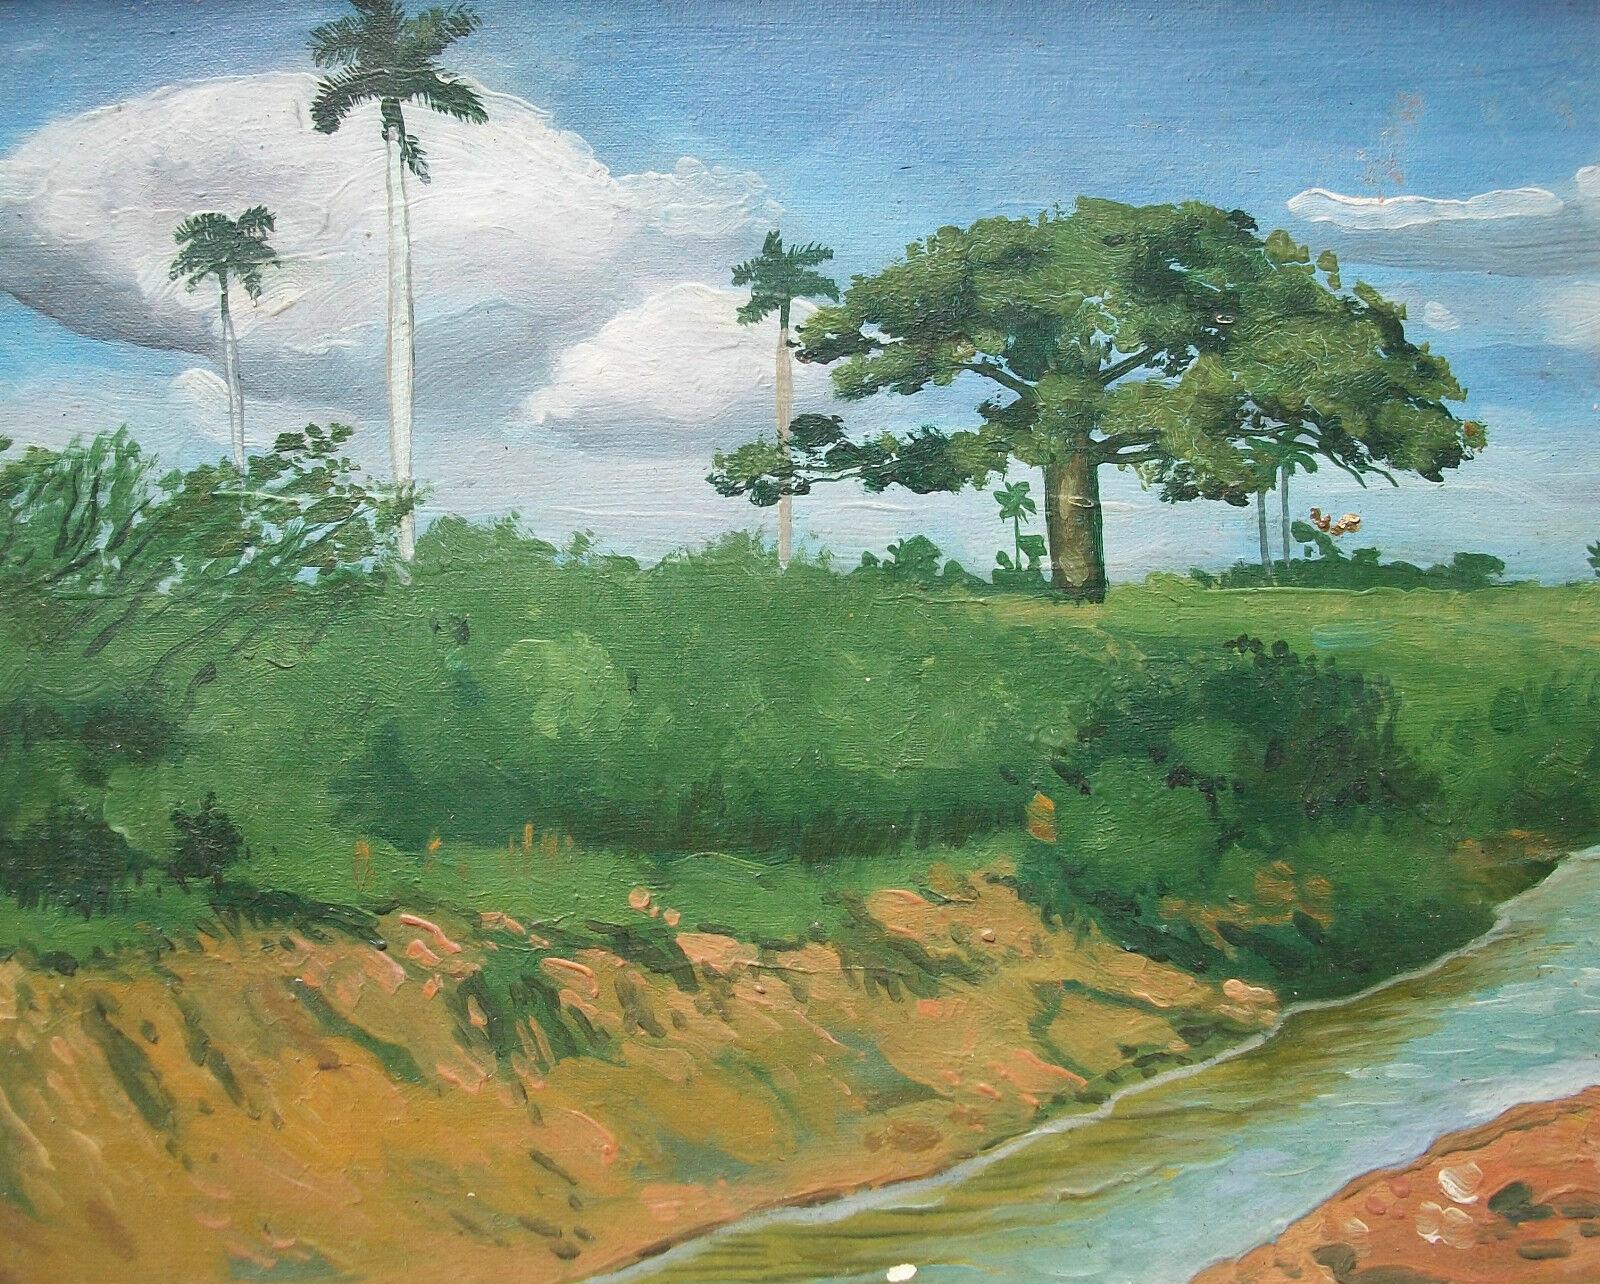 Cuban contemporary landscape oil painting on canvas applied to particle board - unsigned - untitled - wood frame - bearing a numbered official seal of the Ministry of Culture of Cuba - verso - late 20th century.

Good condition - minor pigment loss